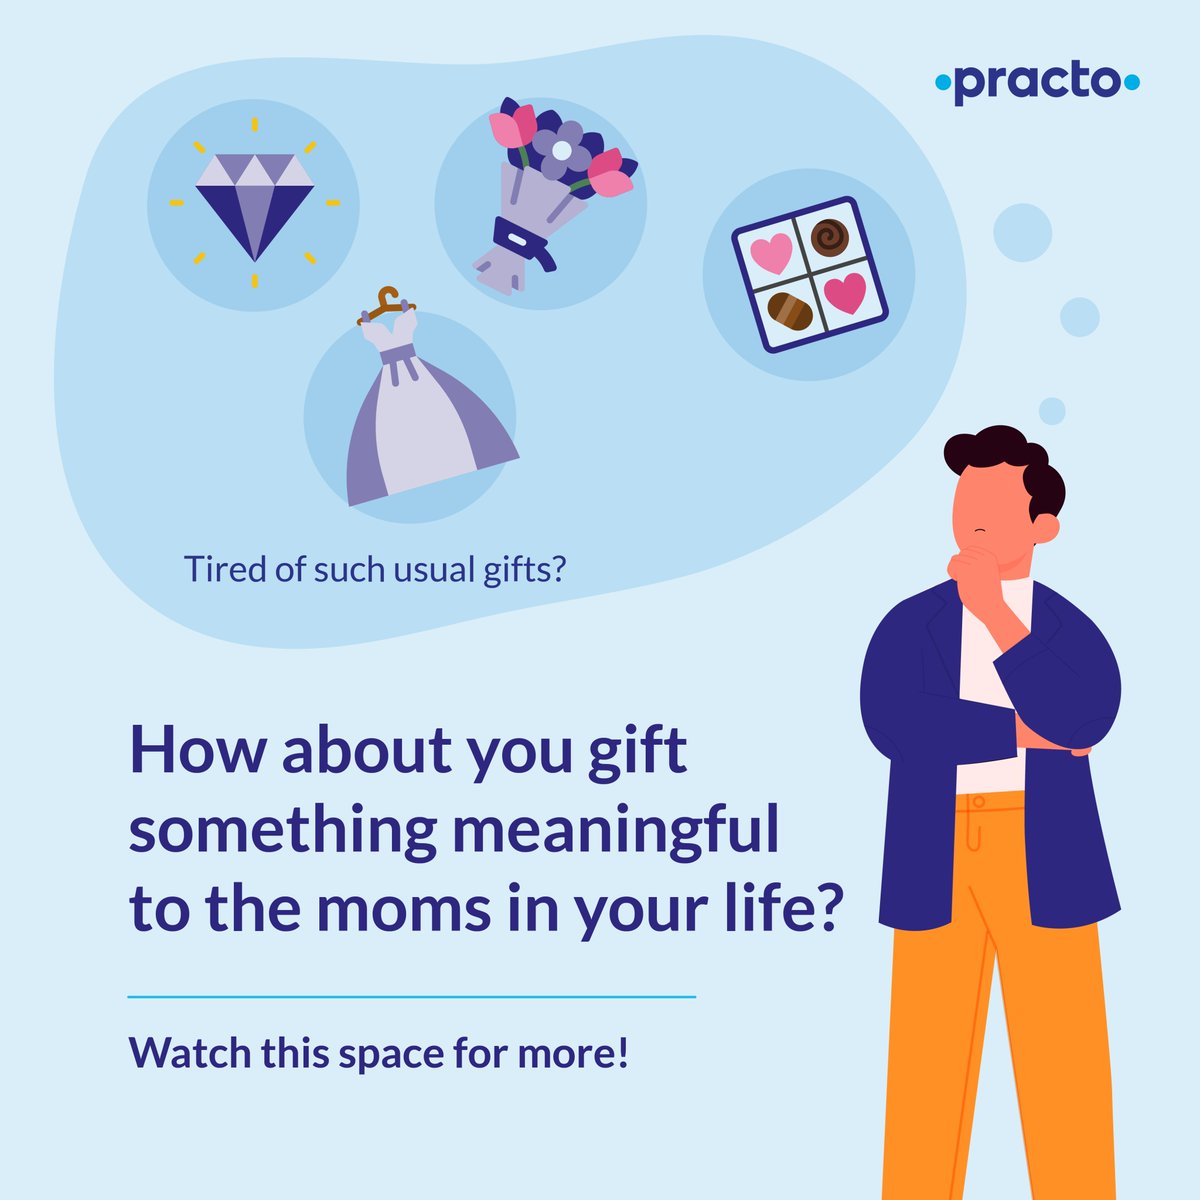 This Mother’s Day, gift something special to the mothers in your life. Stay tuned for more. #MothersDay #RevealingSoon #GiftIdeas #MeaningfulGifts